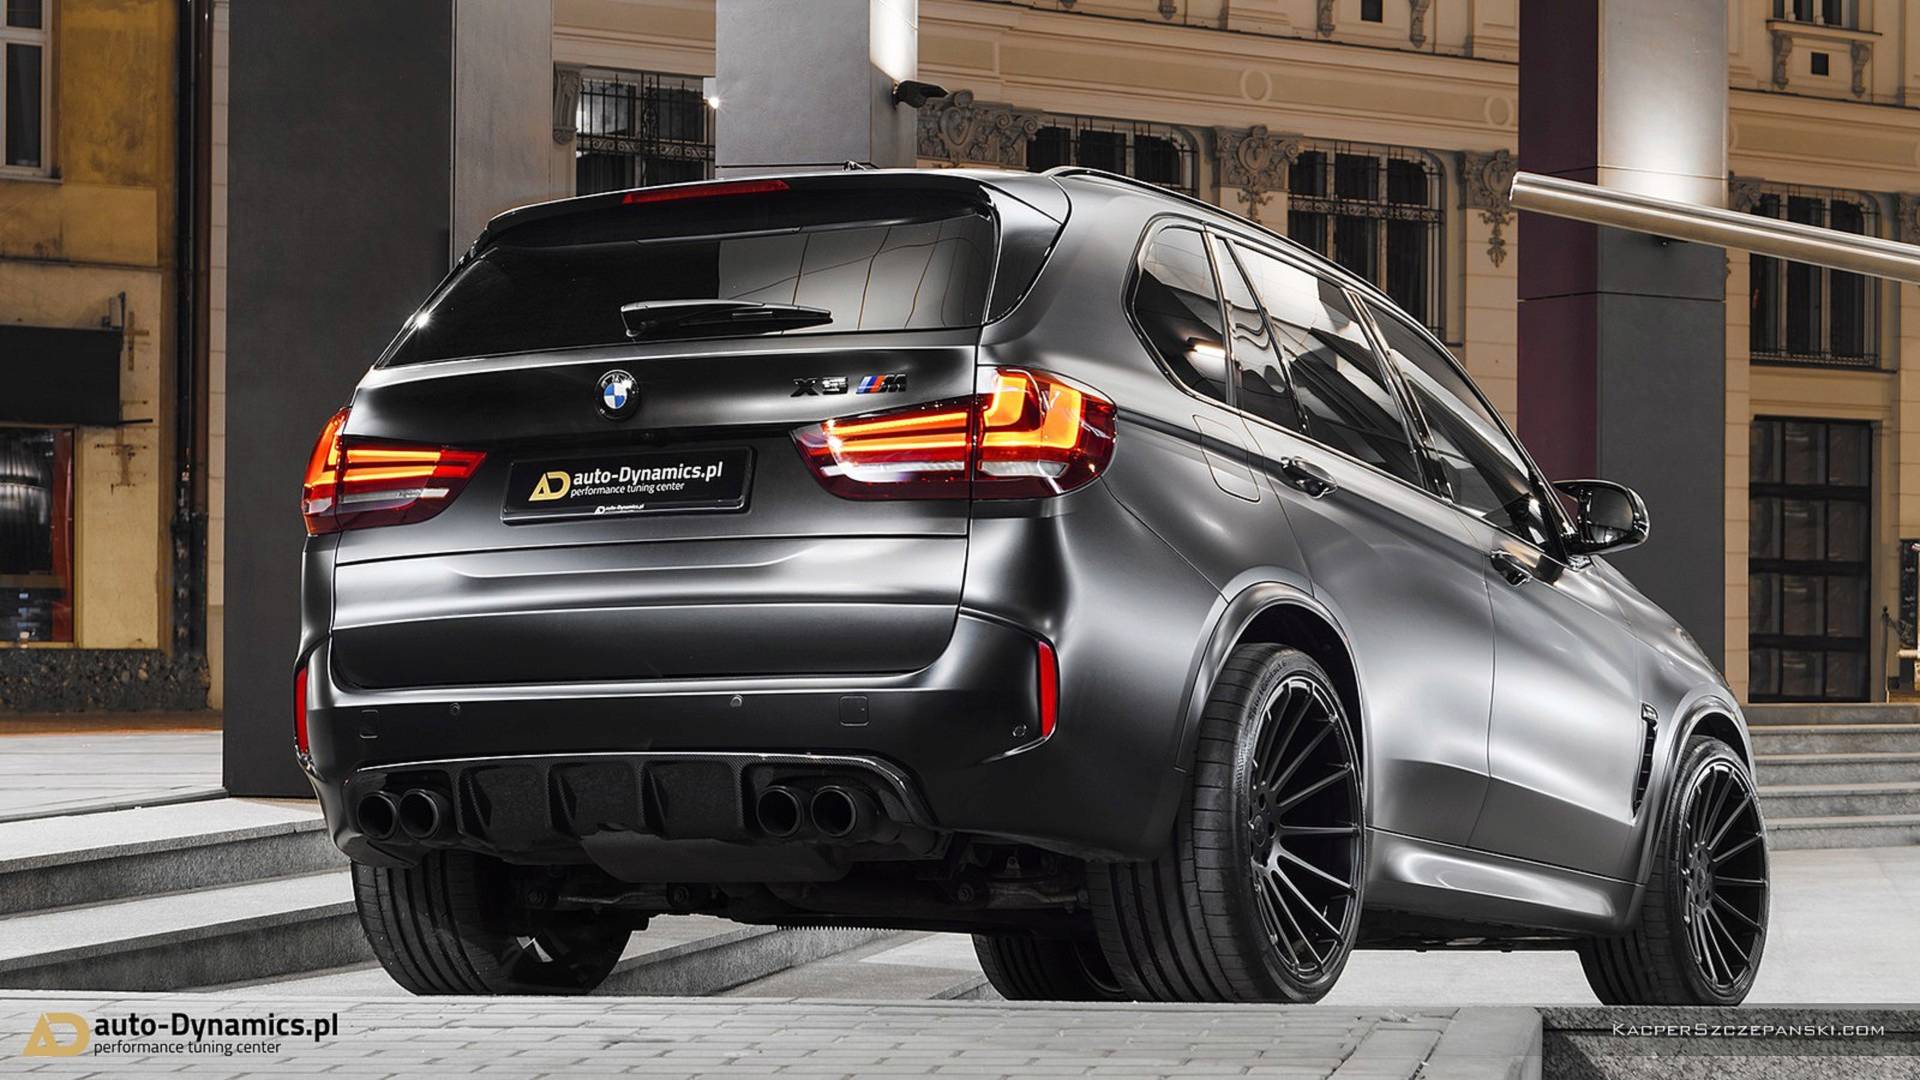 BMW X5 M Avalanche has 670 hp, is very angry